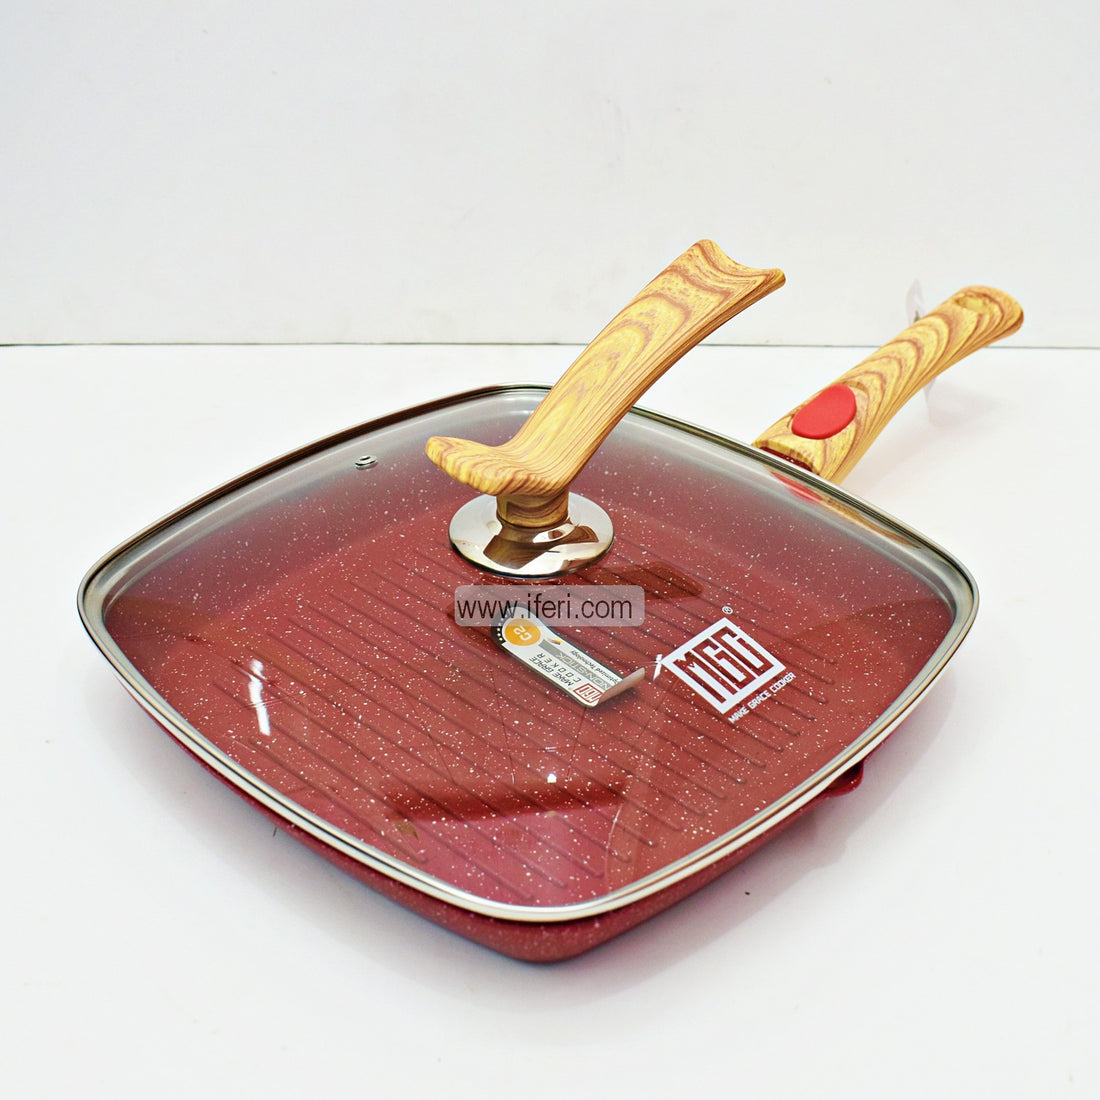 Buy Non-Stick Grill Frying Pan with Lid Online from iferi.com in Bangladesh